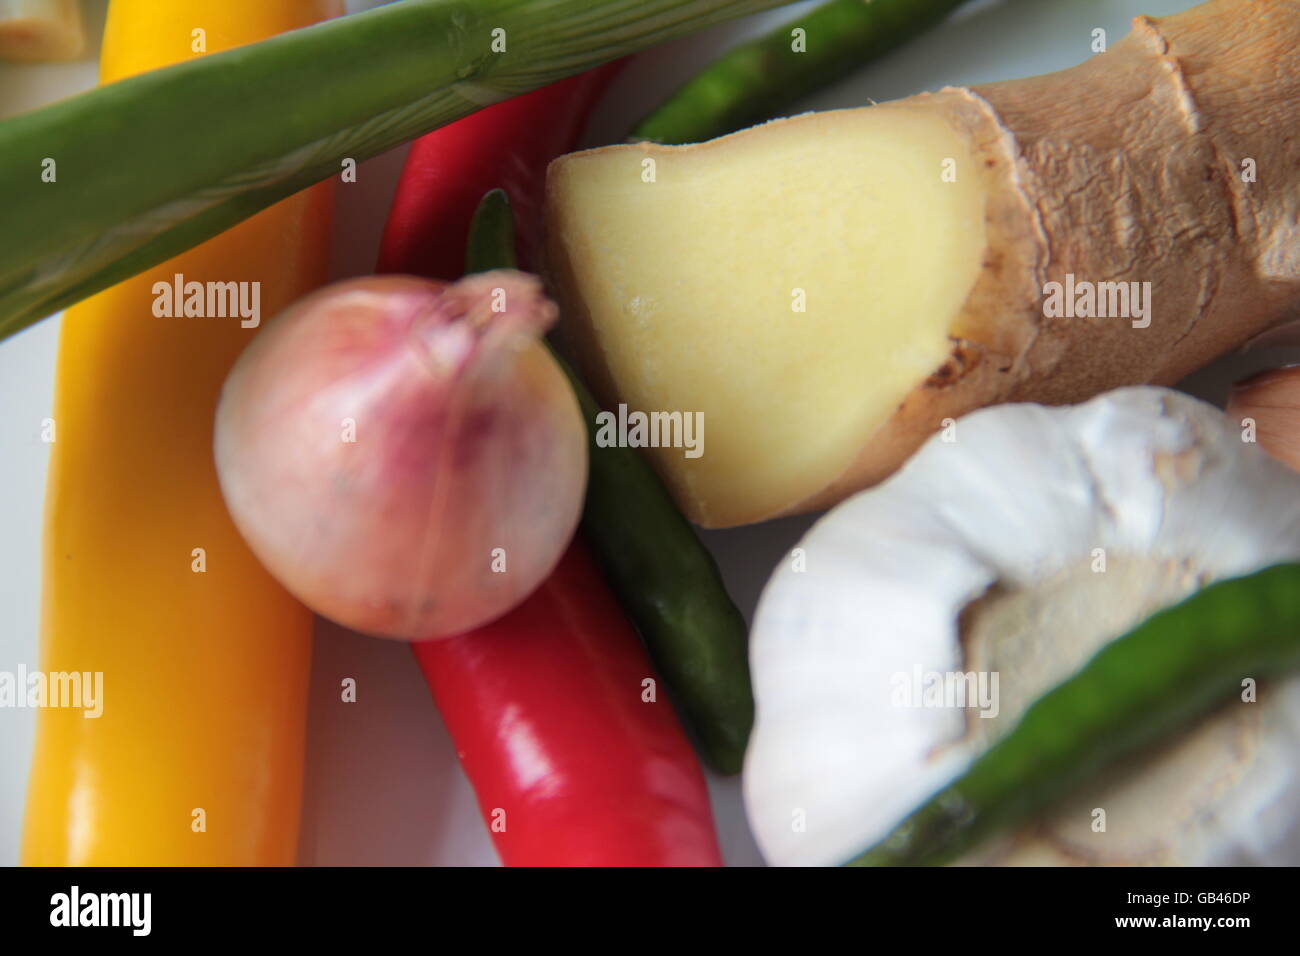 Fresh spicy Asian ingredients. Stock Photo